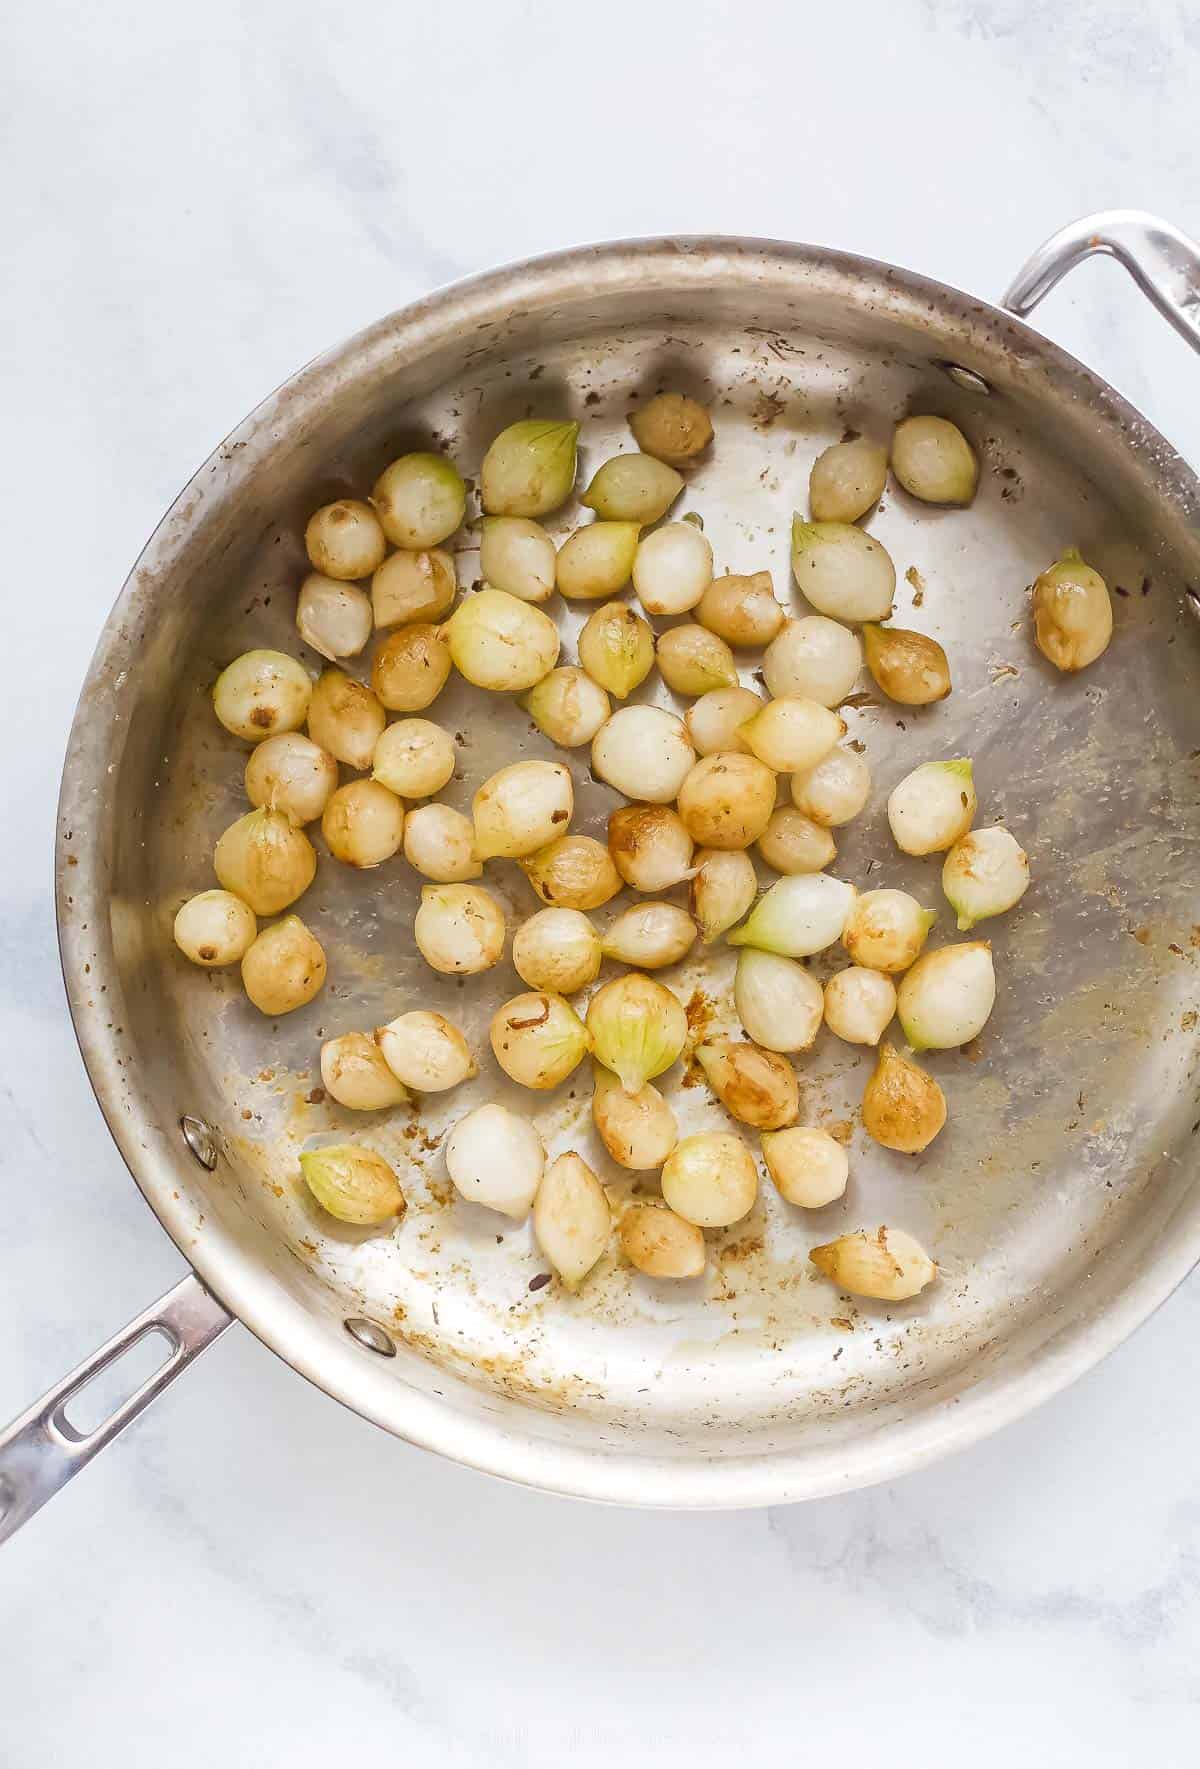 cooking pearl onions in a stainless steel pan